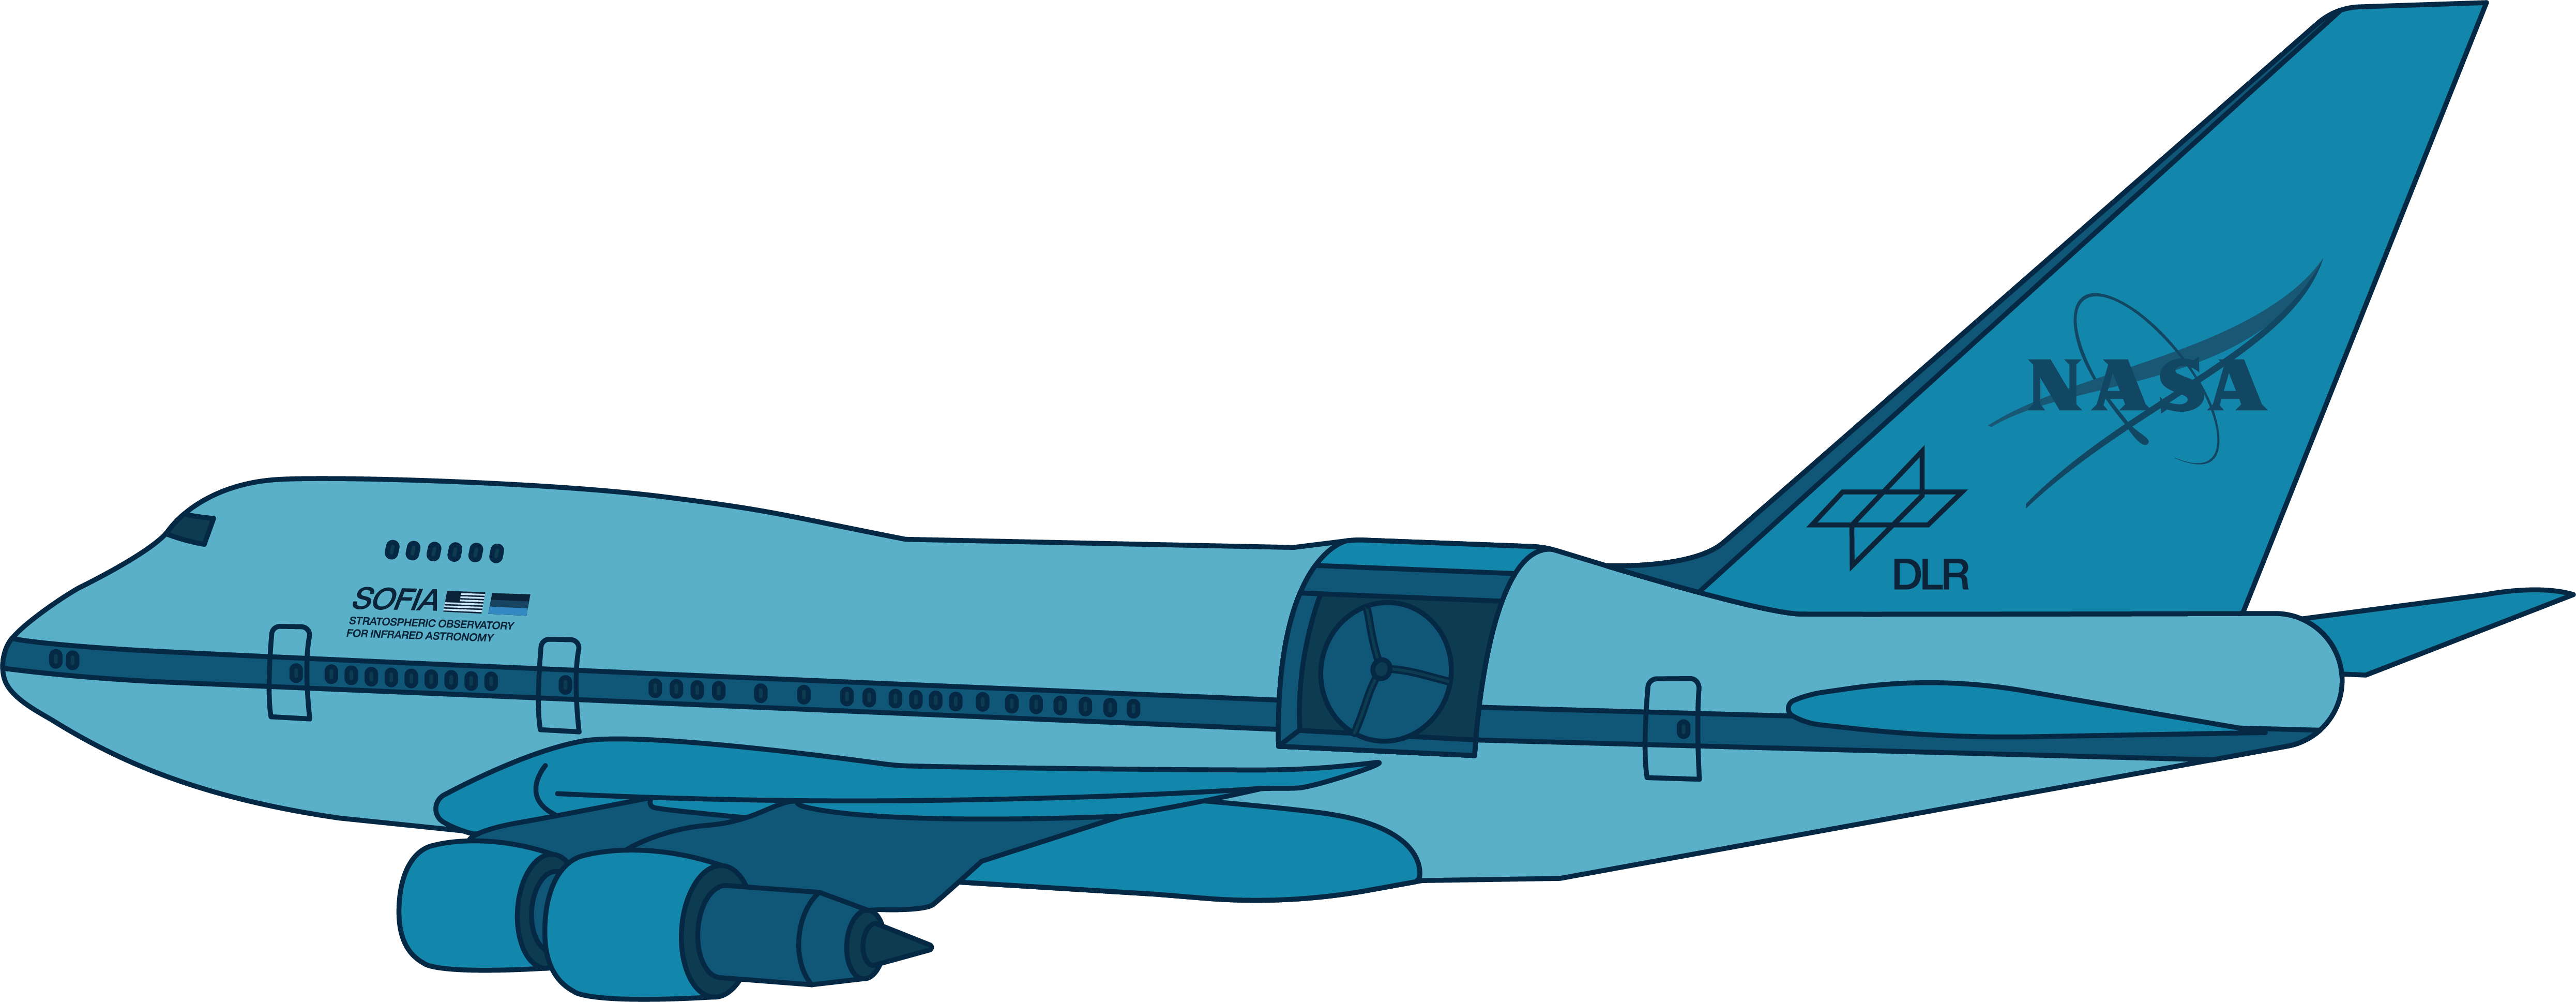 This illustration shows NASA's SOFIA in shades of blue. SOFIA is a modified Boeing 747SP aircraft, and so it is shaped like a commercial airplane, with the NASA and German Aerospace Center (DLR) logos on its tail.